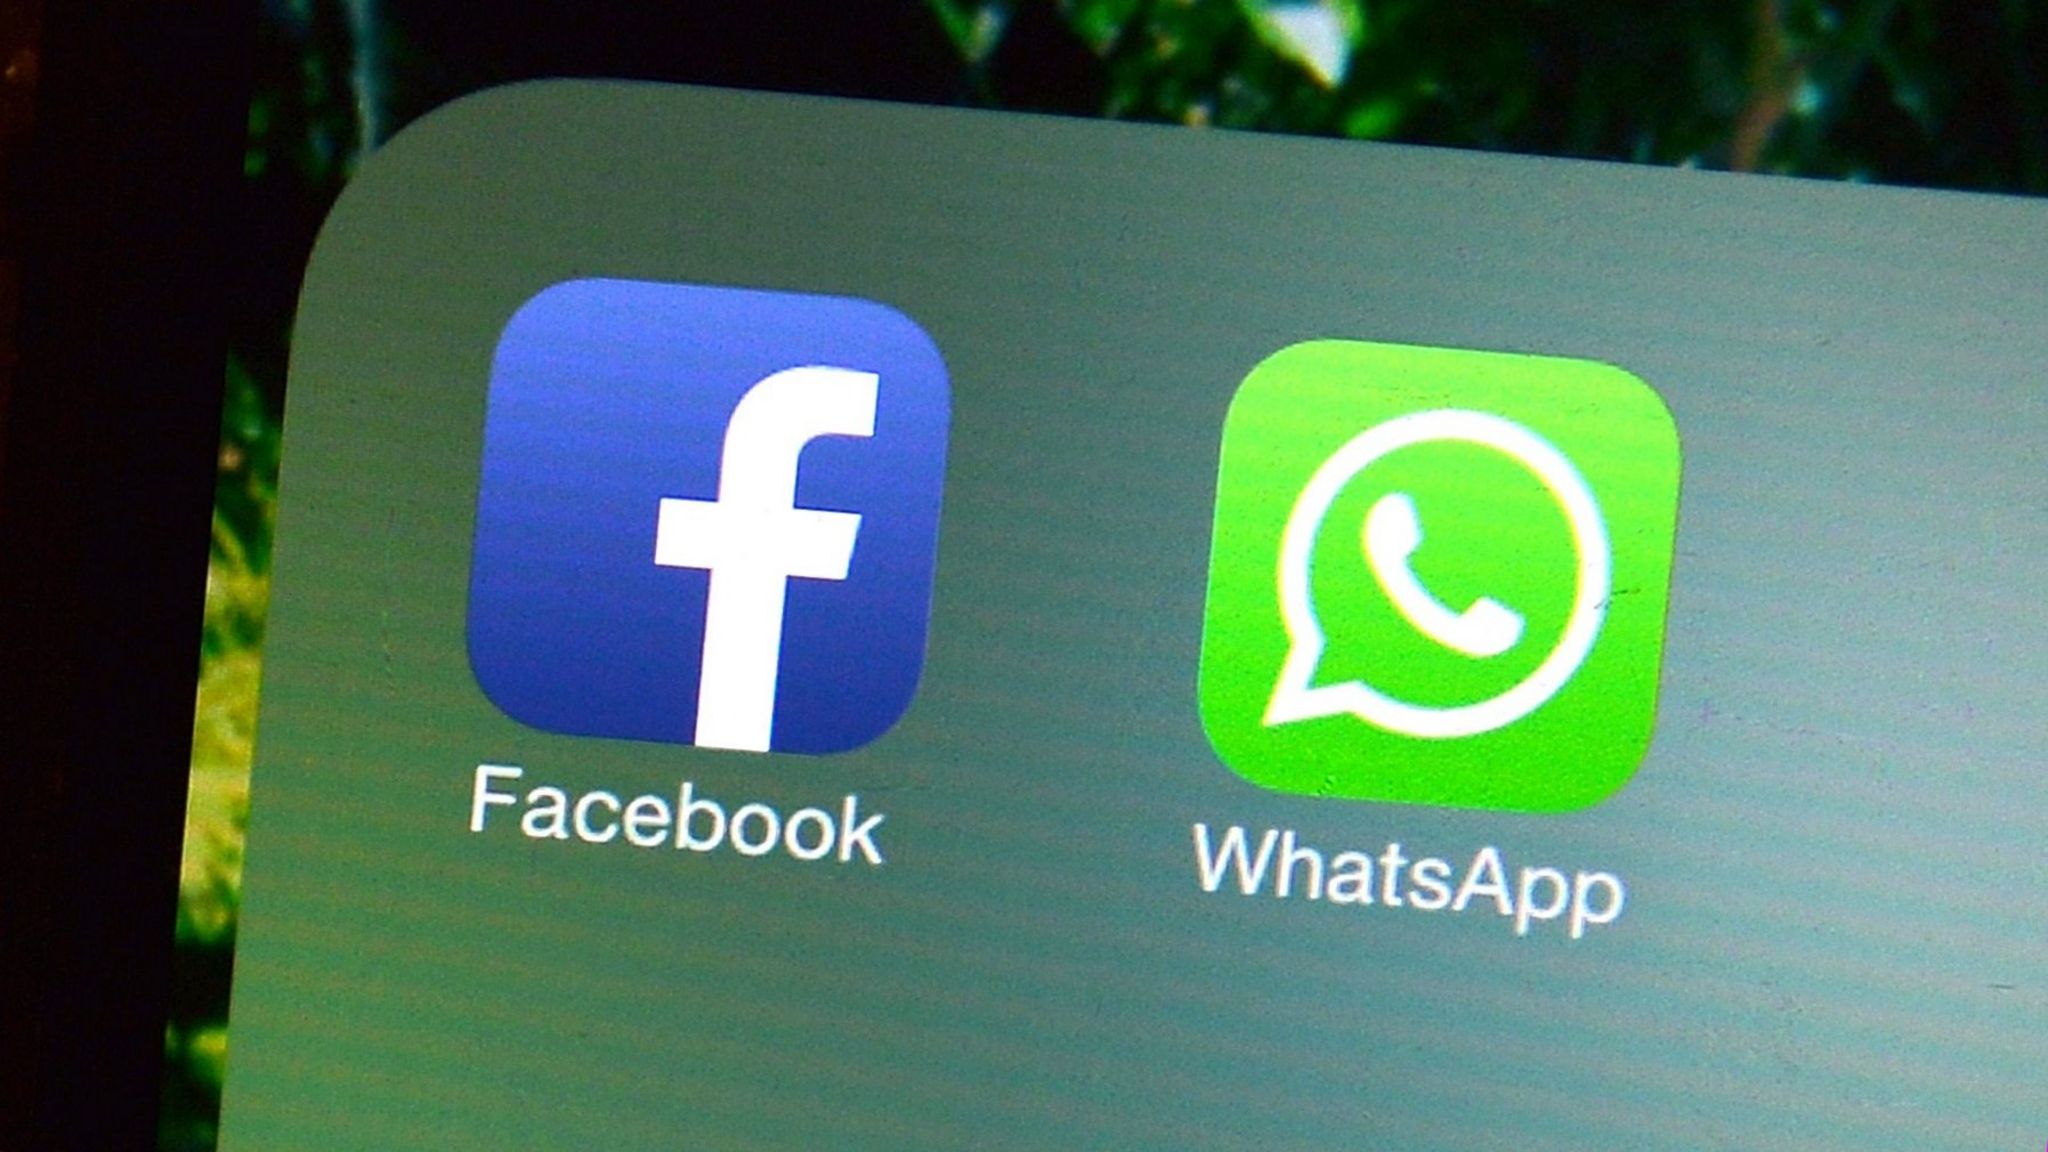 Facebook and WhatsApp icons